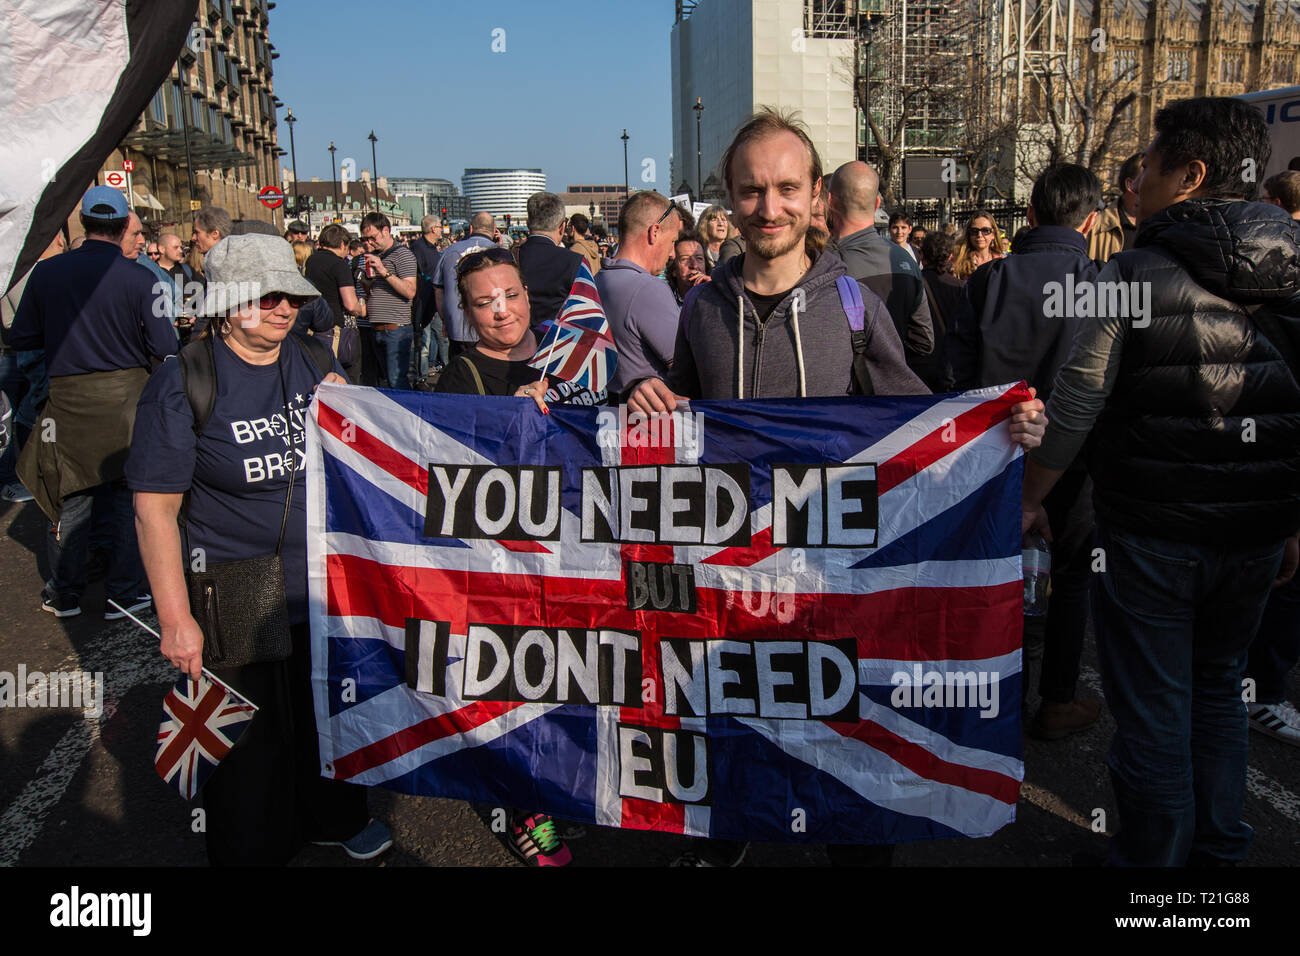 London, UK. 29 March, 2019. Thousands of protesters took to the streets around Parliament for the 'Brexit Betrayal' demonstrations on the day that Britain was supposed to leave the European Union. David Rowe/ Alamy Live News. Stock Photo